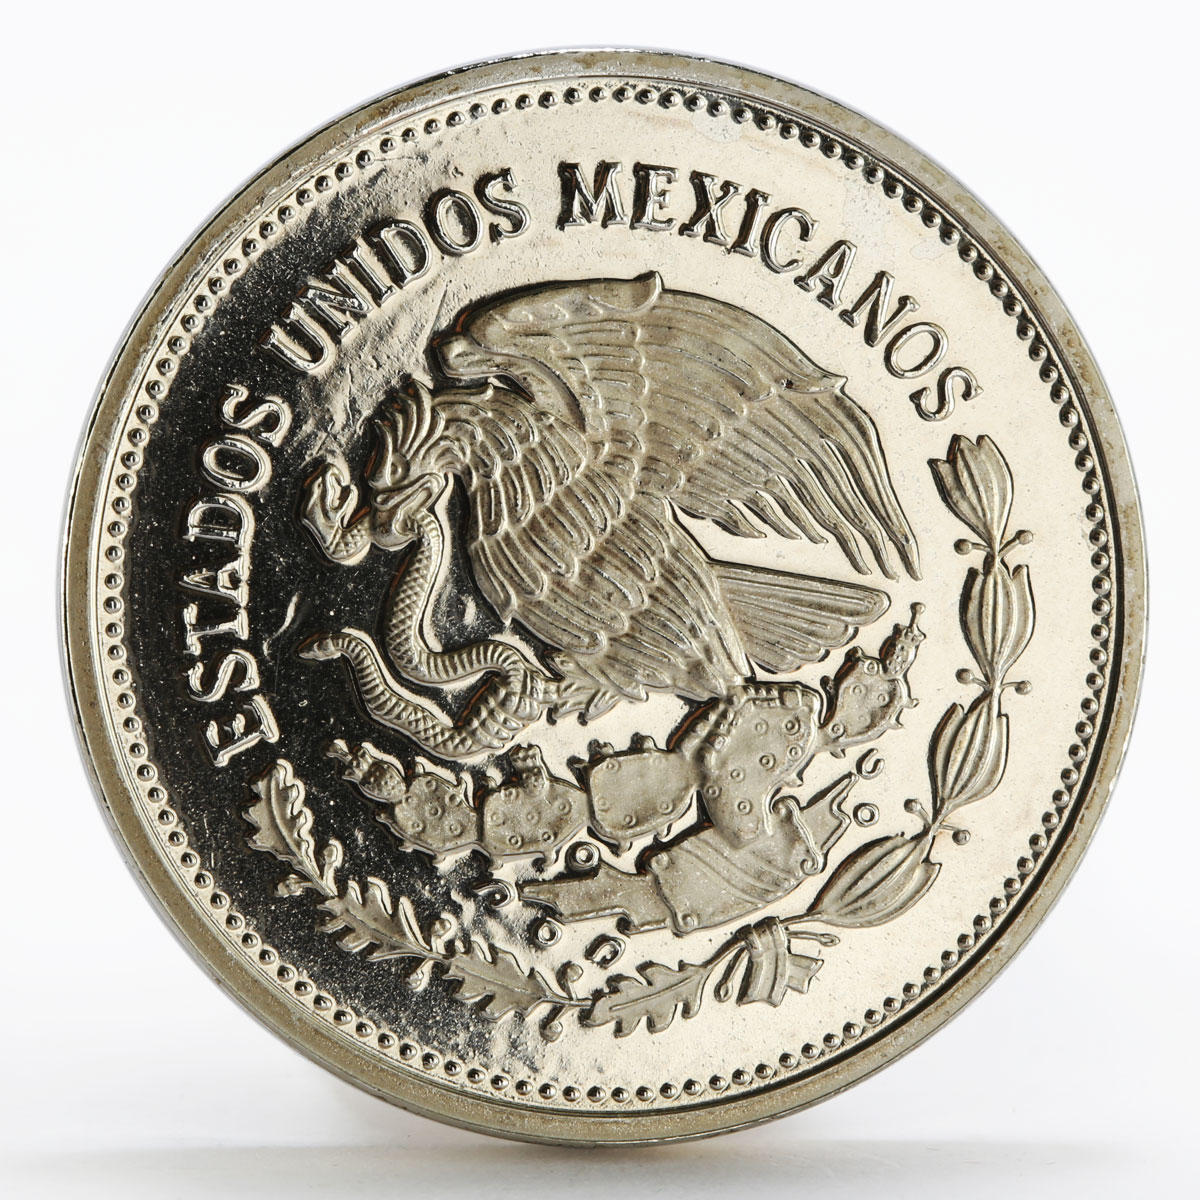 Mexico 500 pesos 75th Anniversary of 1910 Revolution proof silver coin 1985